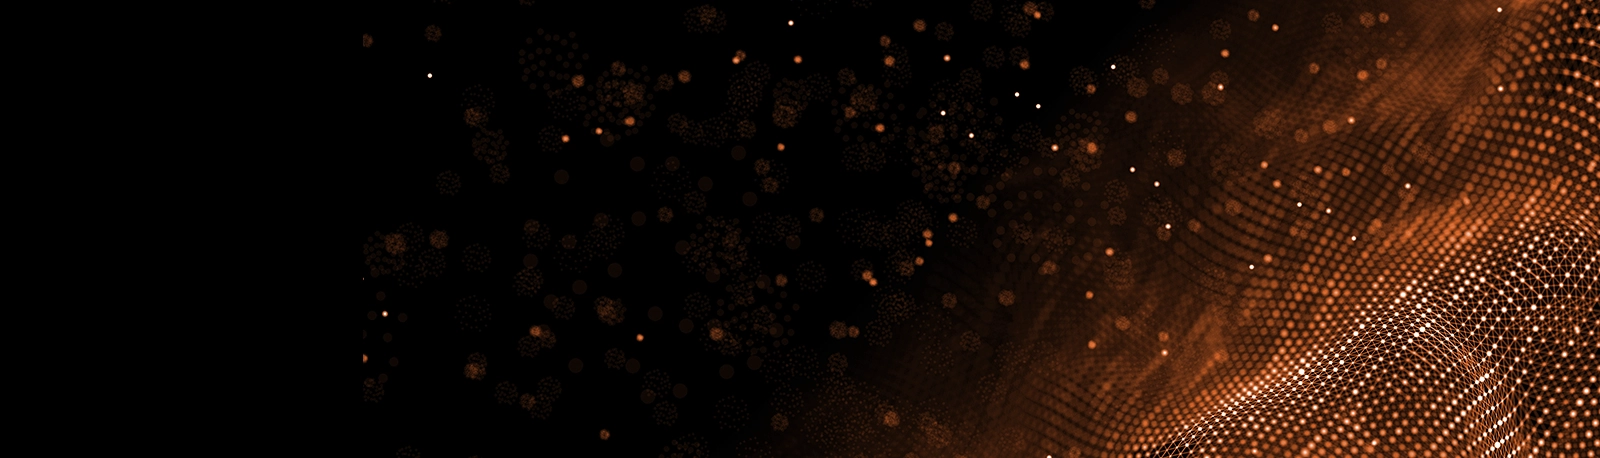 Orange and black abstract visualization of a data network